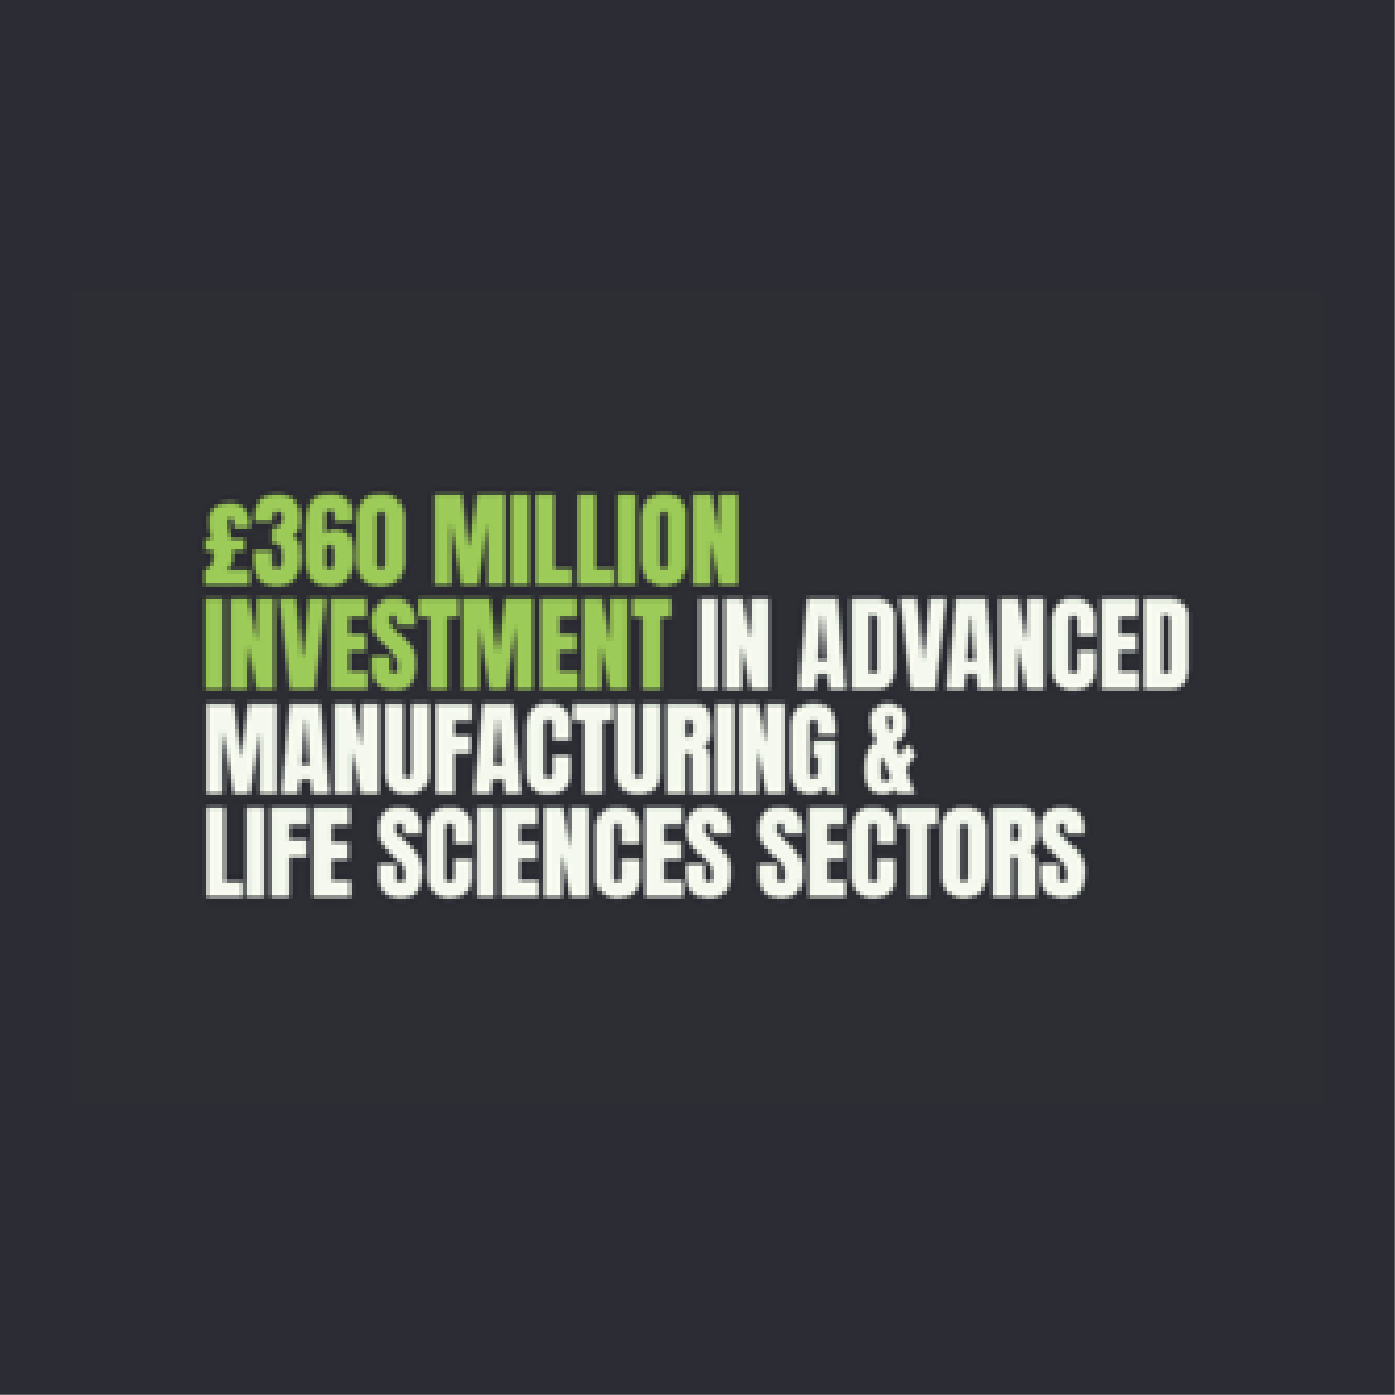 £360 million to boost British manufacturing and R&D